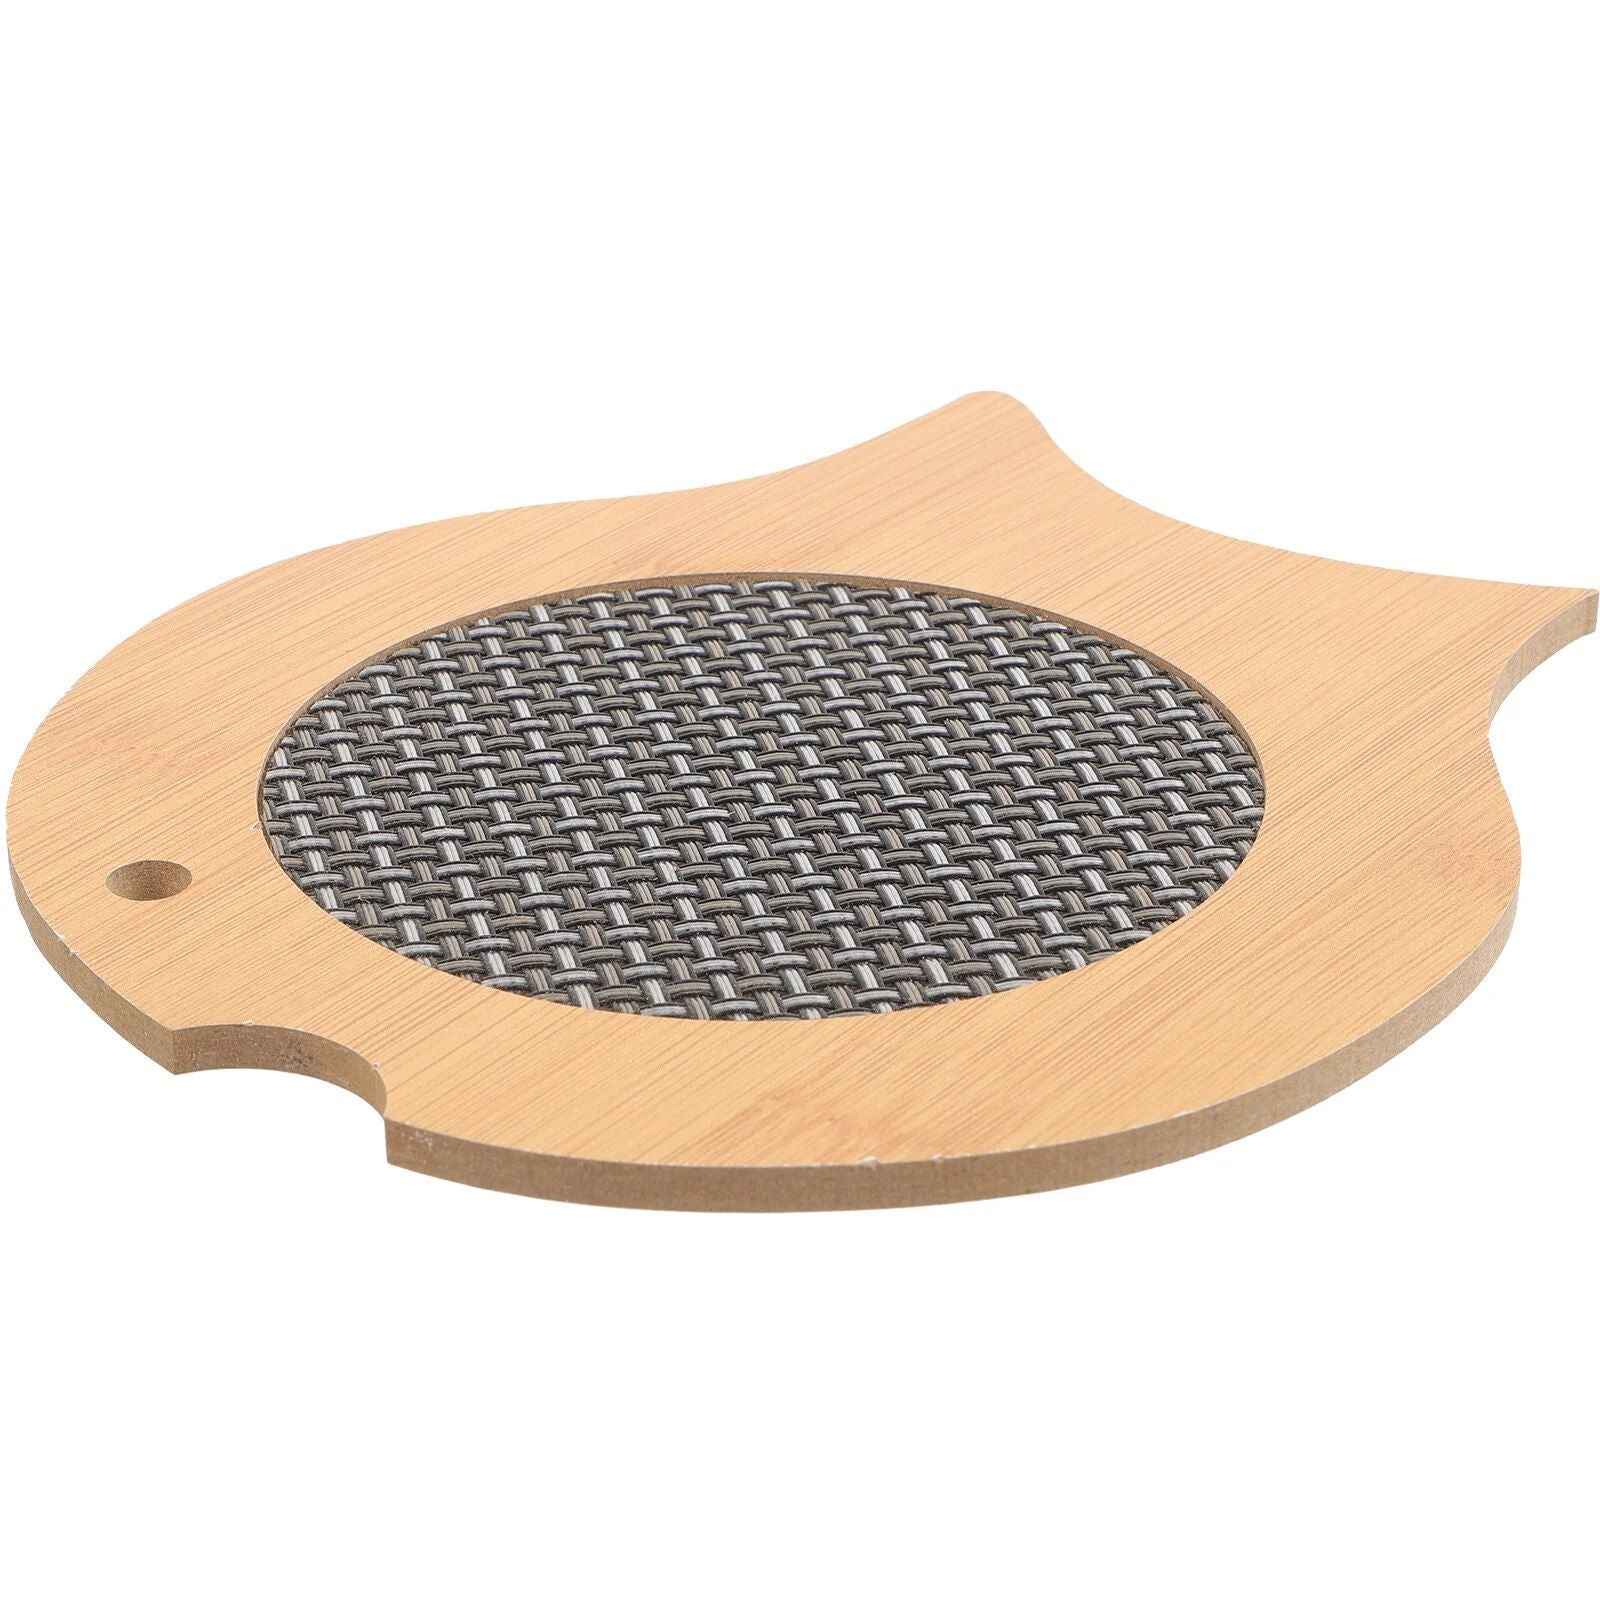 Bamboo Multi-Purpose Trivets for Kitchen and Dining - Round Classic Style Coasters and Hot Pot Holders